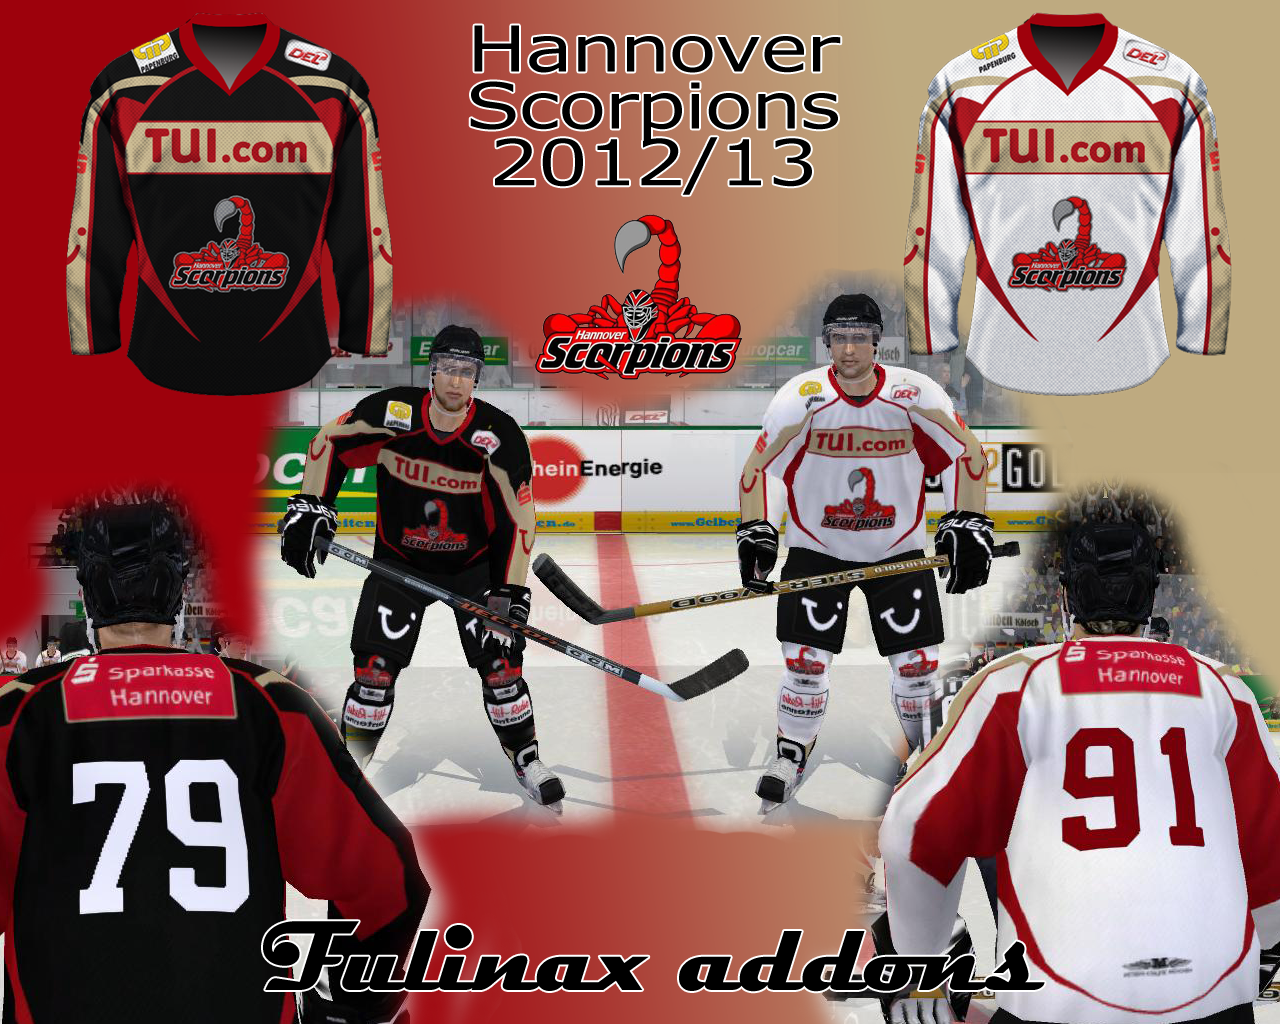 Hannover Scorpions 2013